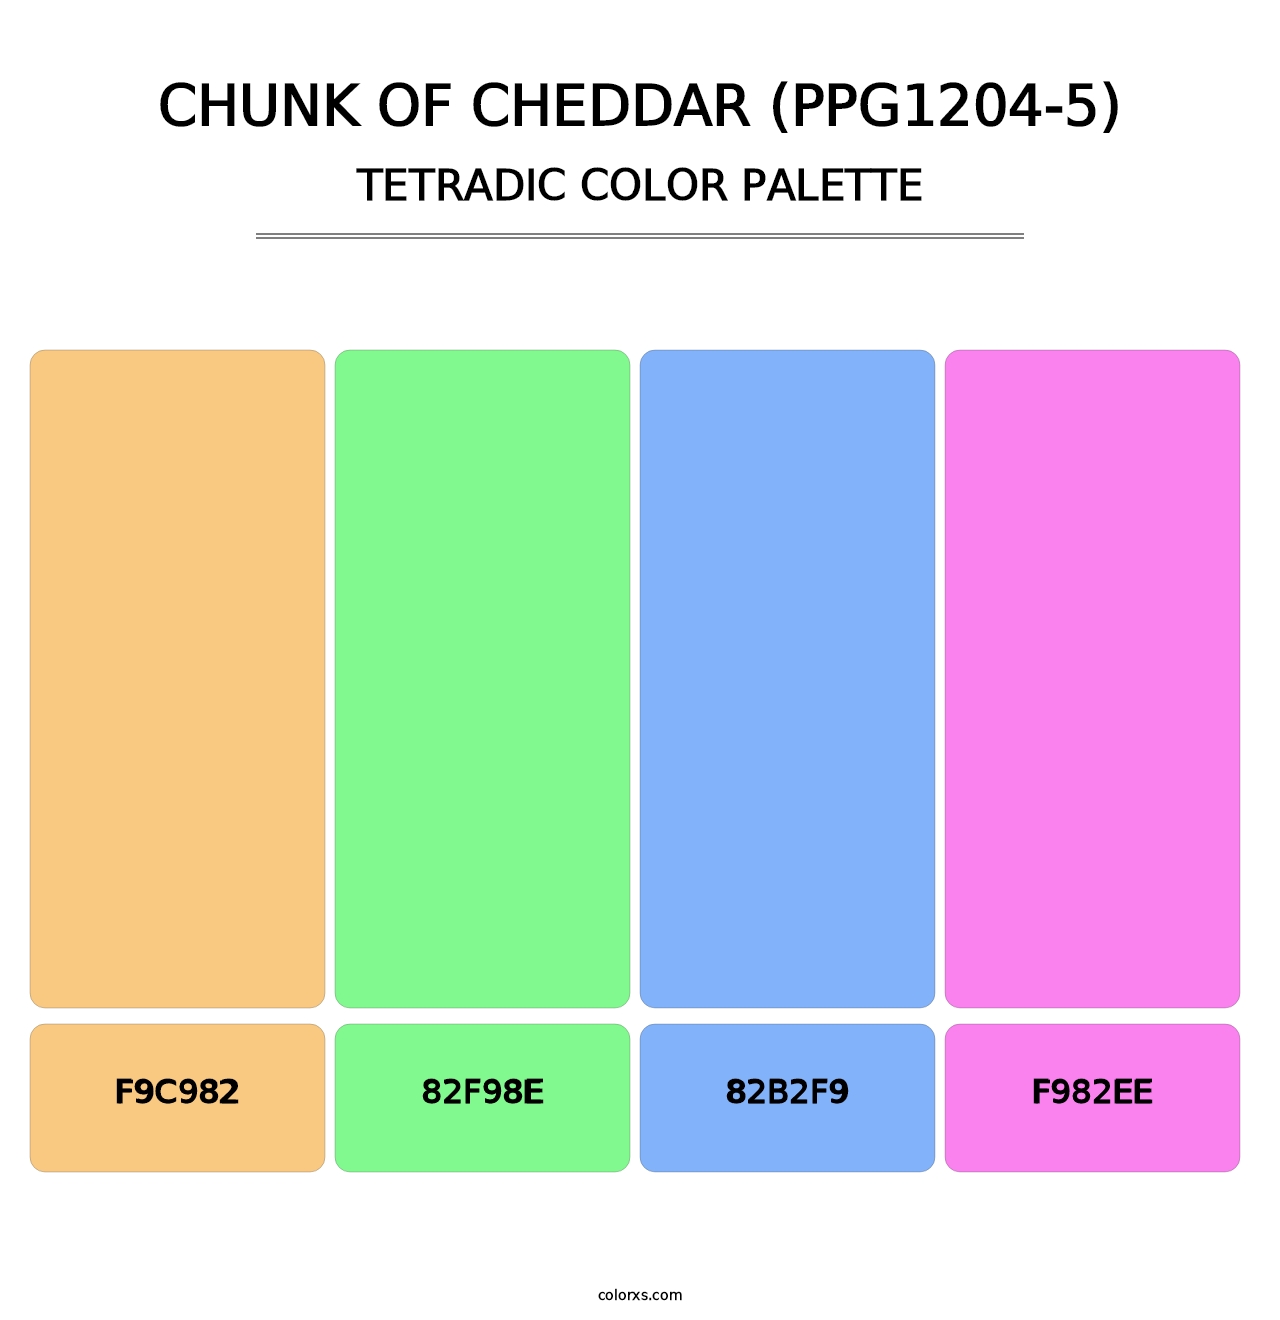 Chunk Of Cheddar (PPG1204-5) - Tetradic Color Palette